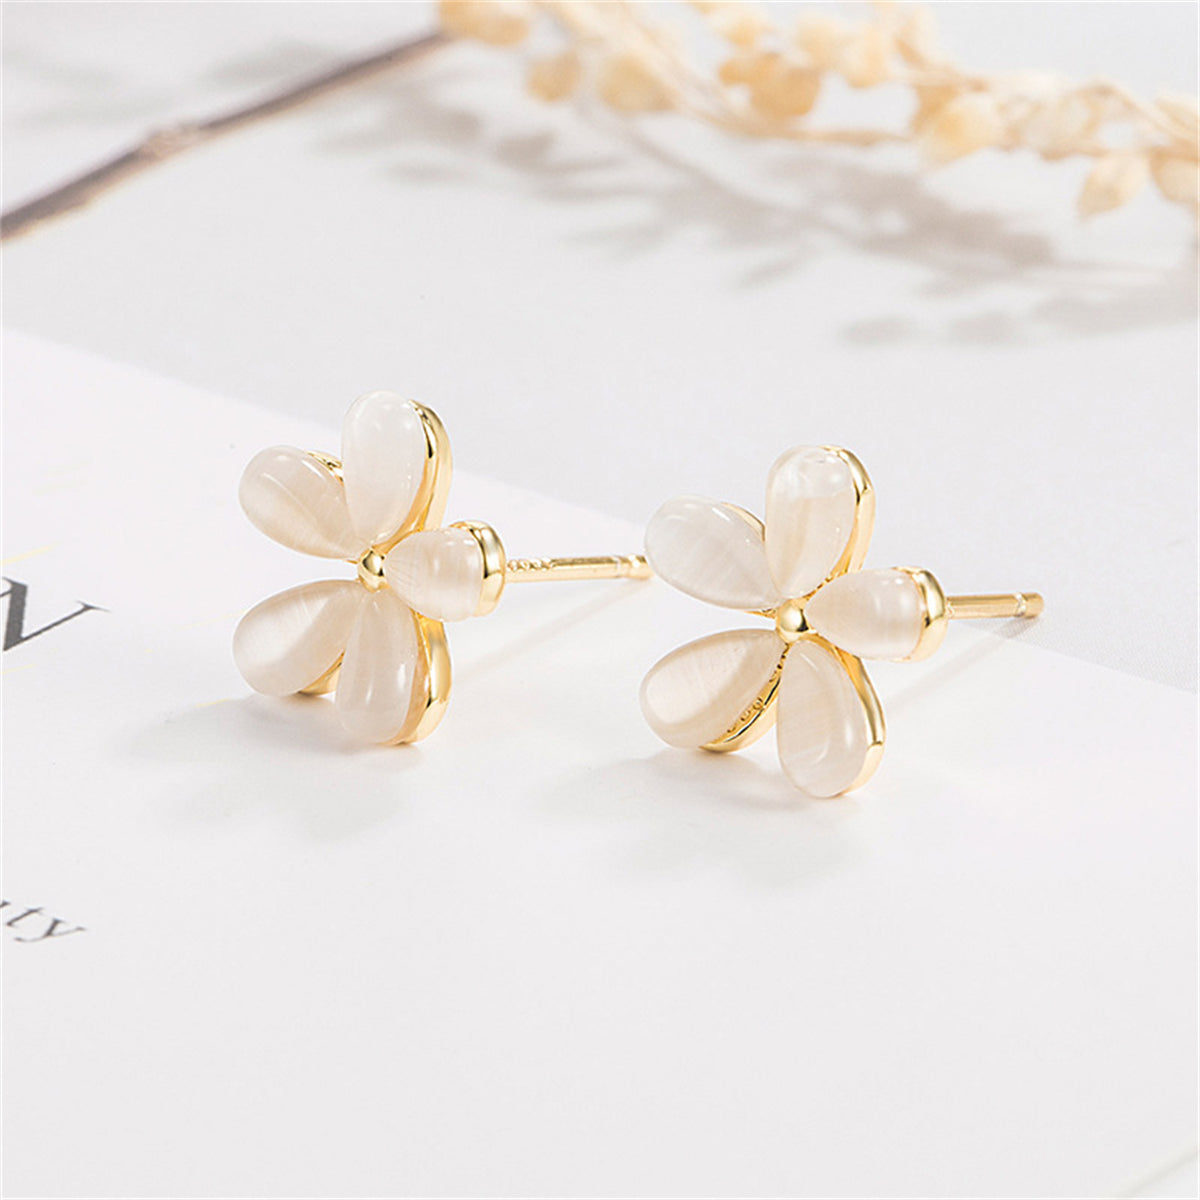 Cateye & 18K Gold-Plated Floral Stud Earrings